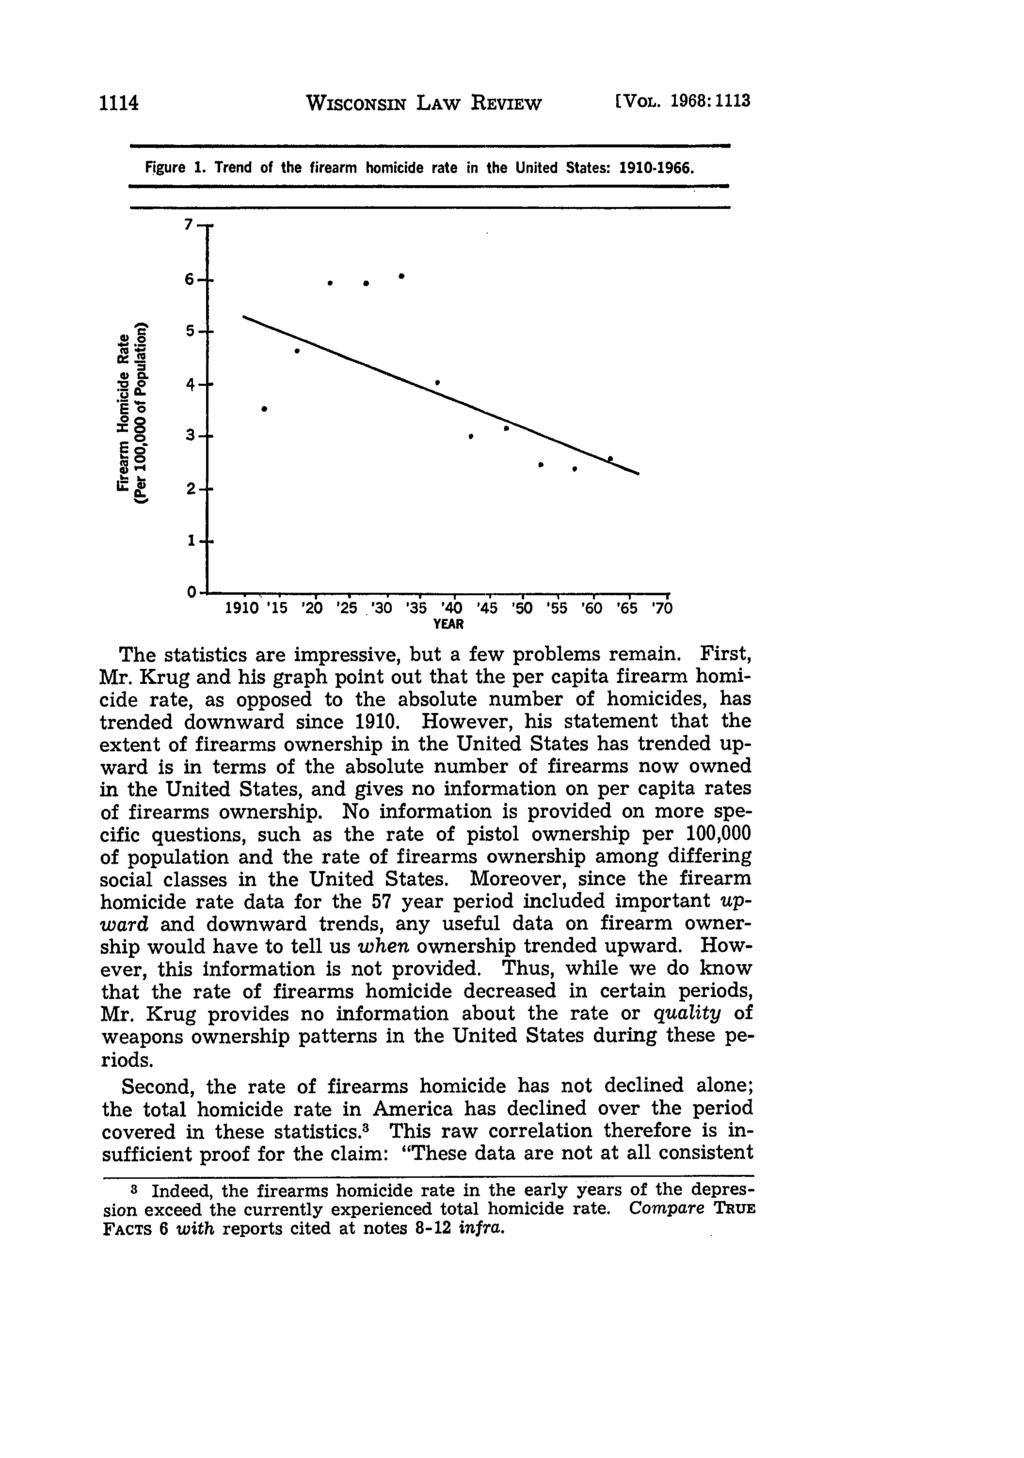 1114 WISCONSIN LAW REVIEW [VOL. 1968:1113 Figure 1. Trend of the firearm homicide rate in the United States: 1910-1966. 7-6- ' 5 *0 4--- V0. 3-2- 1 19i0 '15 '20 '25.